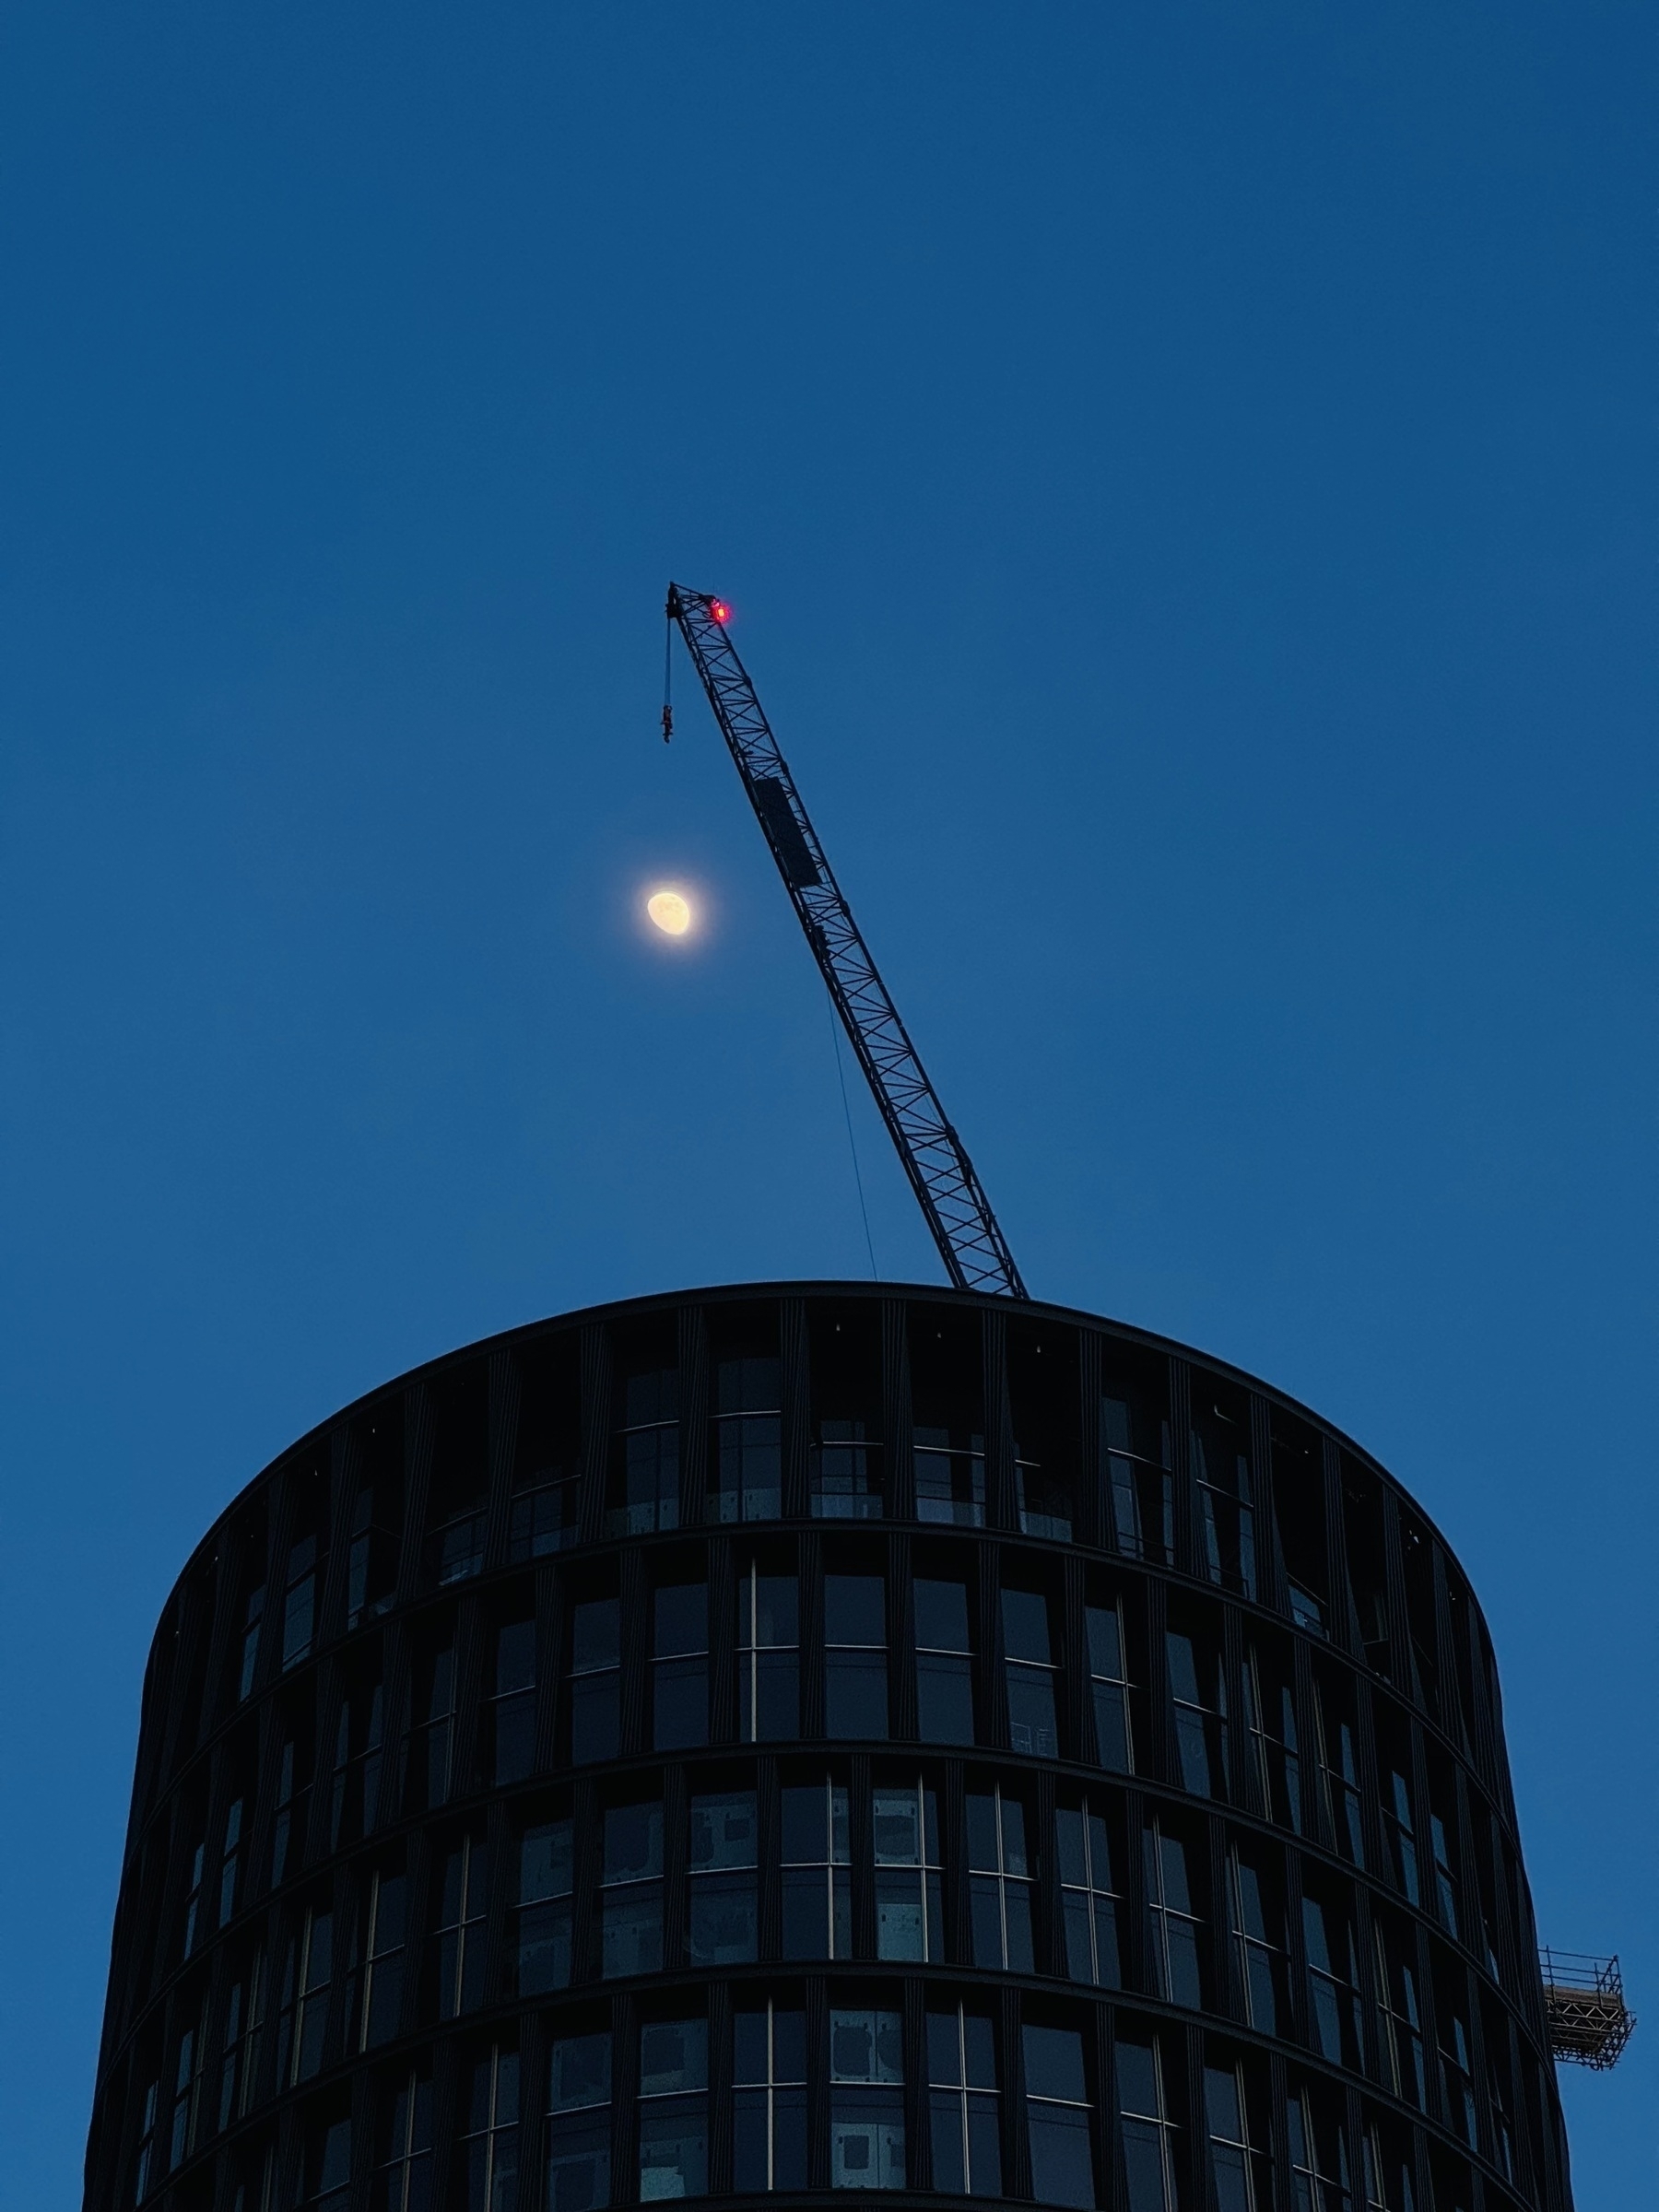 A crane poking out above a cylindrical building. The moon is hanging below the crane, making it look like the crane is fishing for the moon.